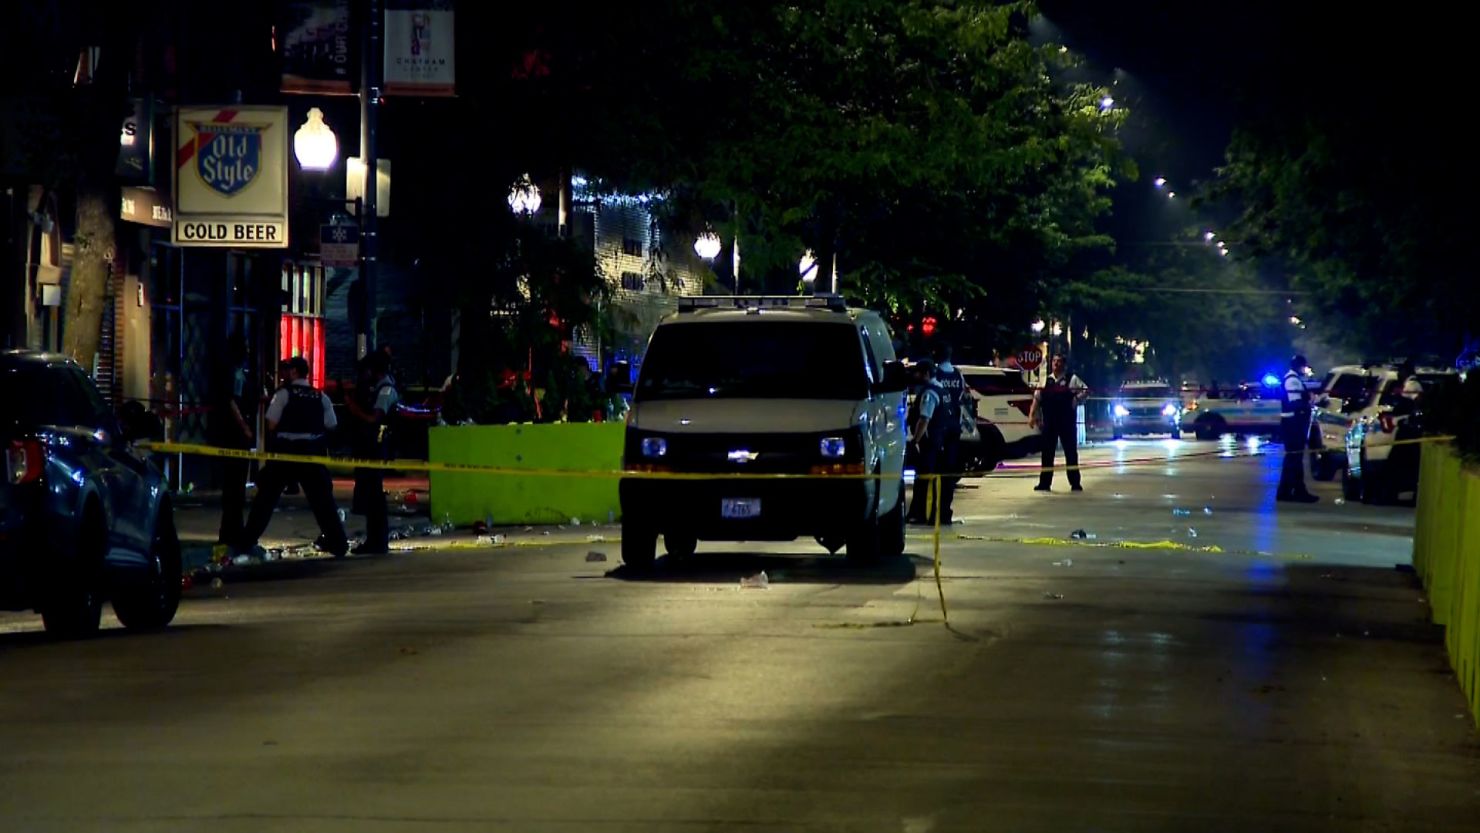 A shooting in Chicago early Saturday killed 1 person and injured others.